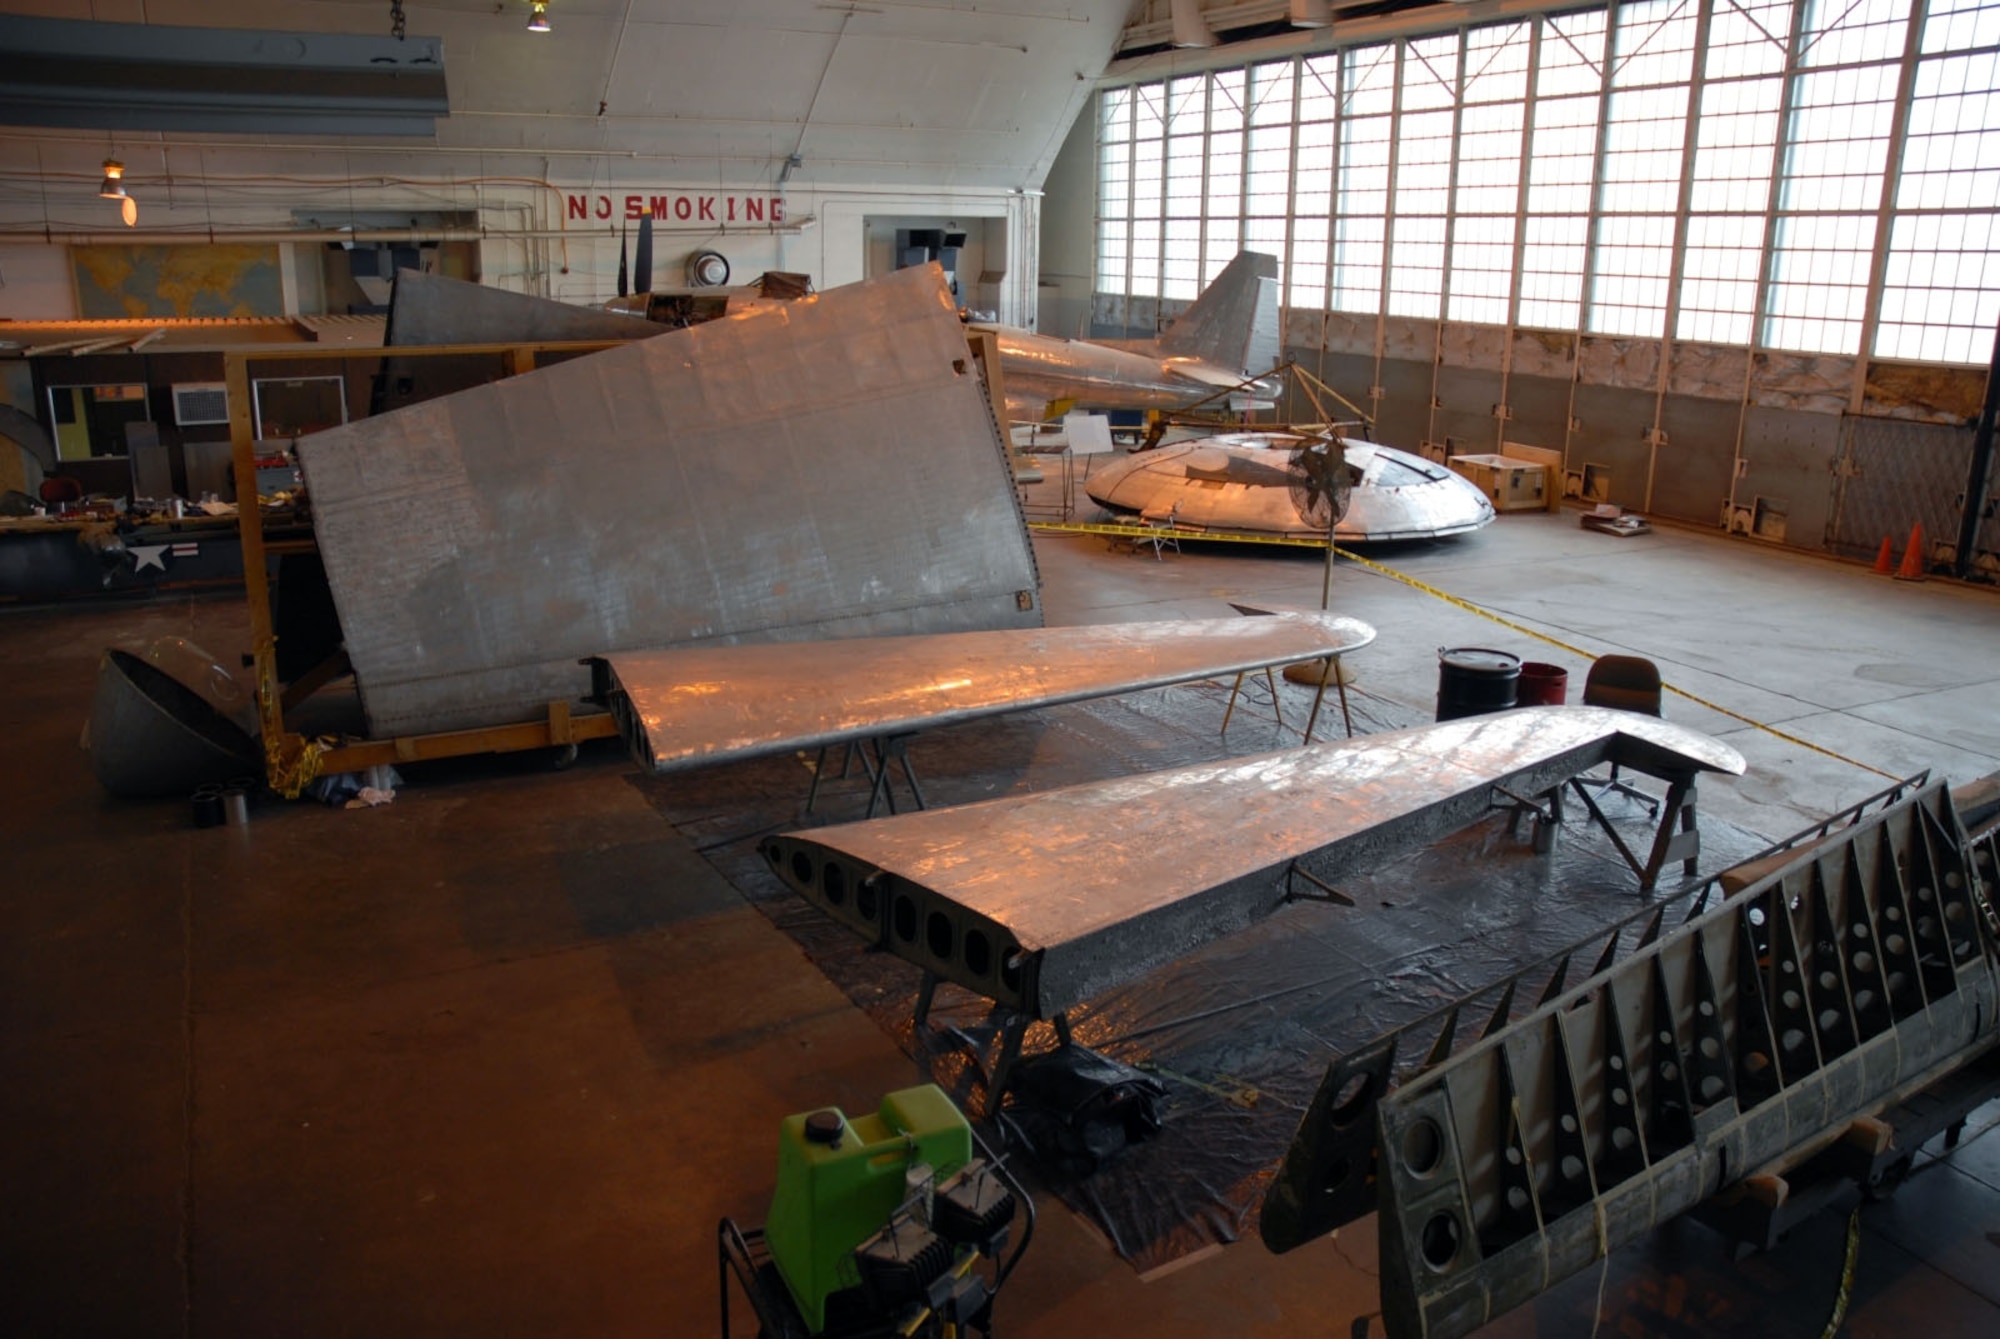 DAYTON, Ohio (11/2007) -- The B-17F "Memphis Belle" undergoing restoration at the National Museum of the United States Air Force. (U.S. Air Force photo)